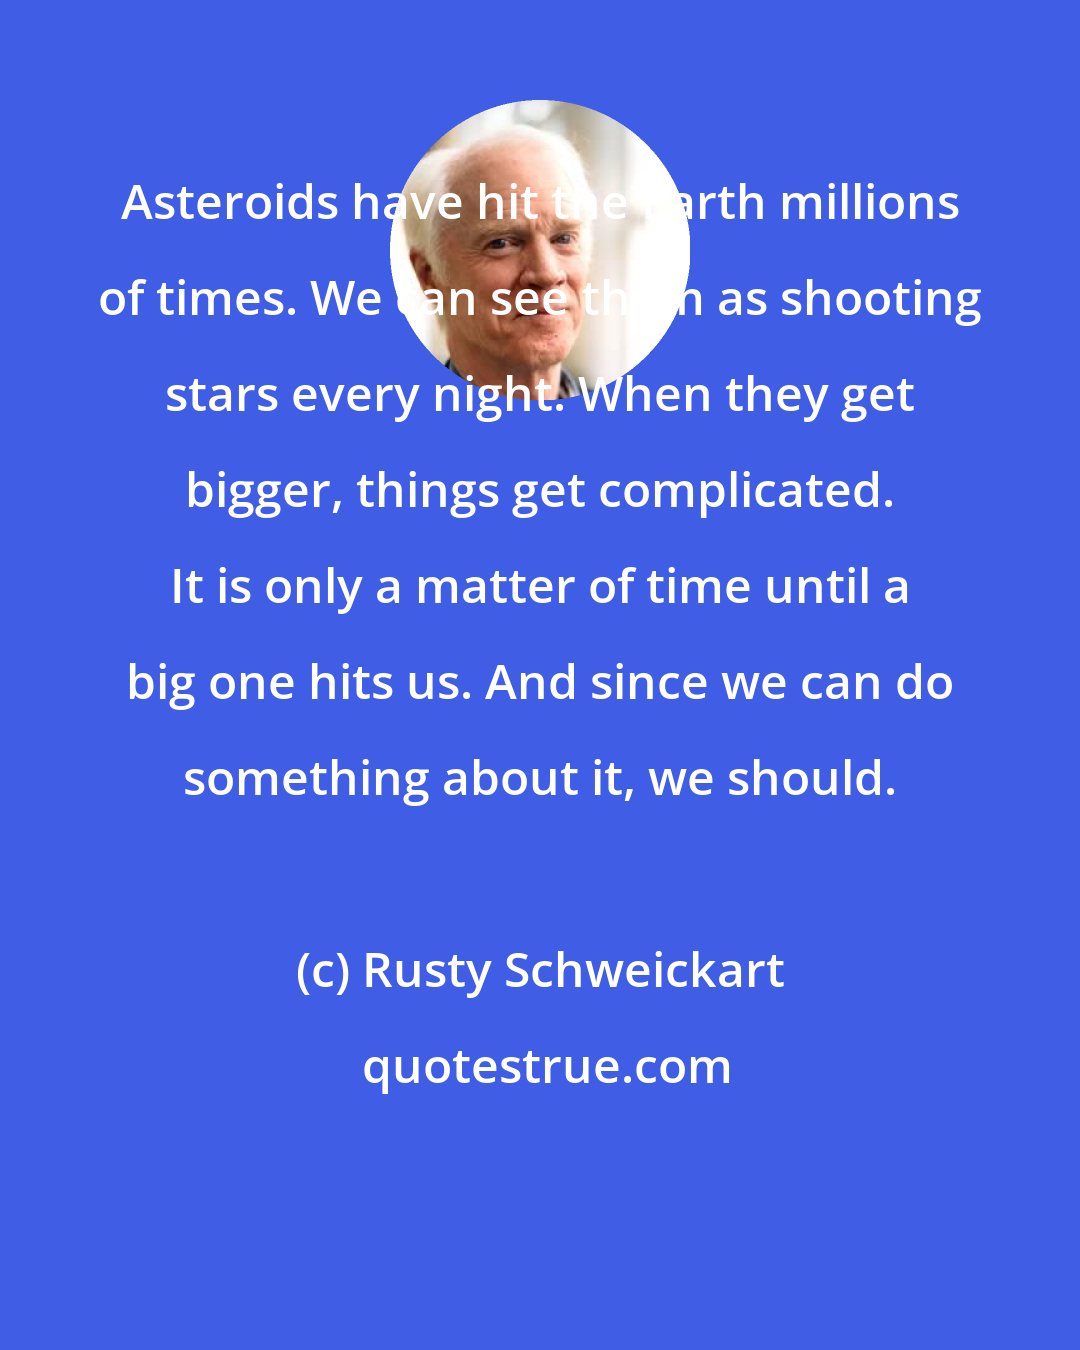 Rusty Schweickart: Asteroids have hit the Earth millions of times. We can see them as shooting stars every night. When they get bigger, things get complicated. It is only a matter of time until a big one hits us. And since we can do something about it, we should.